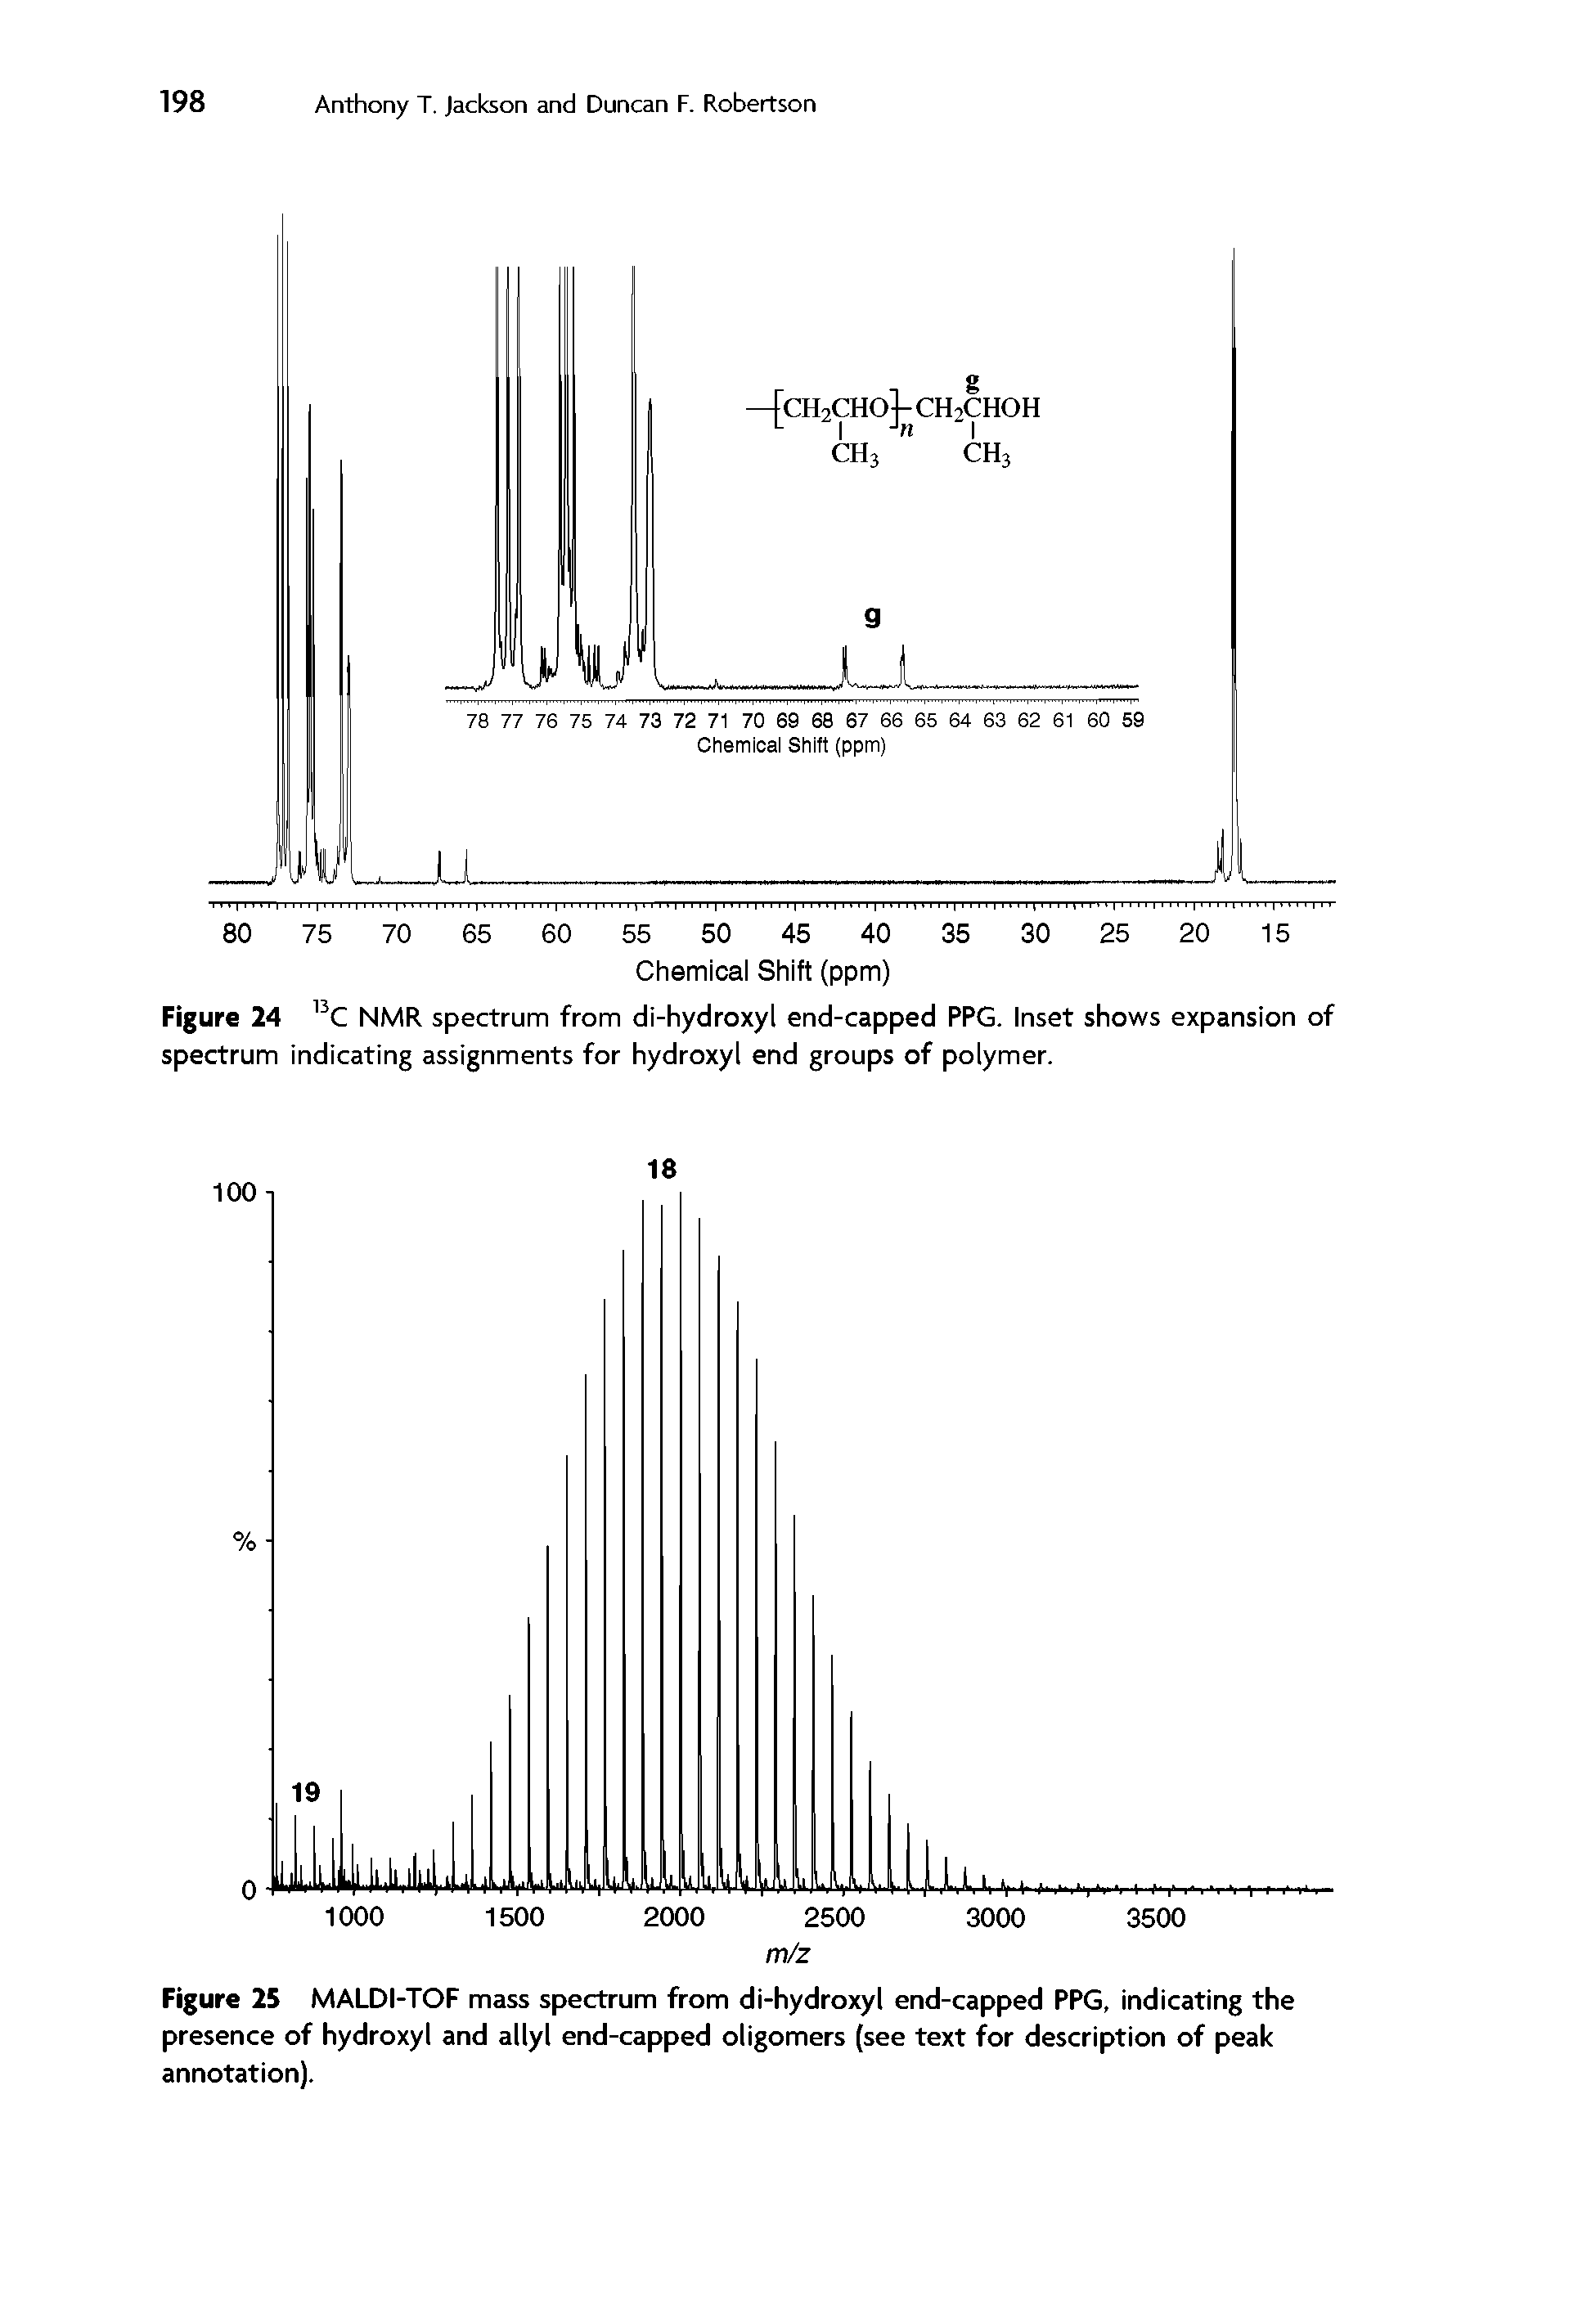 Figure 25 MALDI-TOF mass spectrum from di-hydroxyl end-capped PPG, indicating the presence of hydroxyl and ally end-capped oligomers (see text for description of peak annotation).